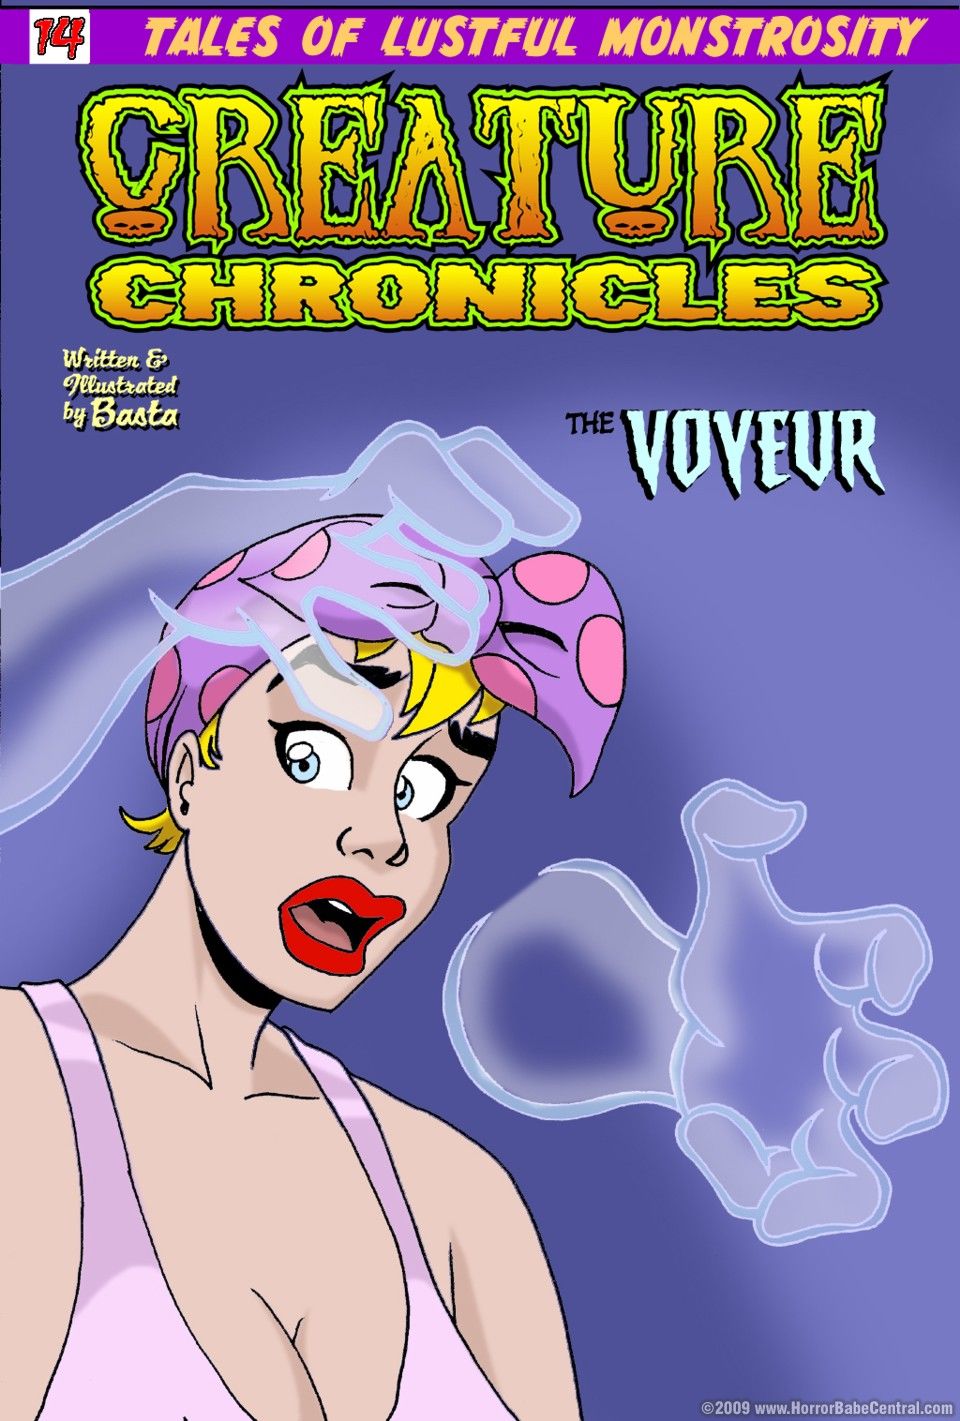 Creature Chronicles 14 page 1